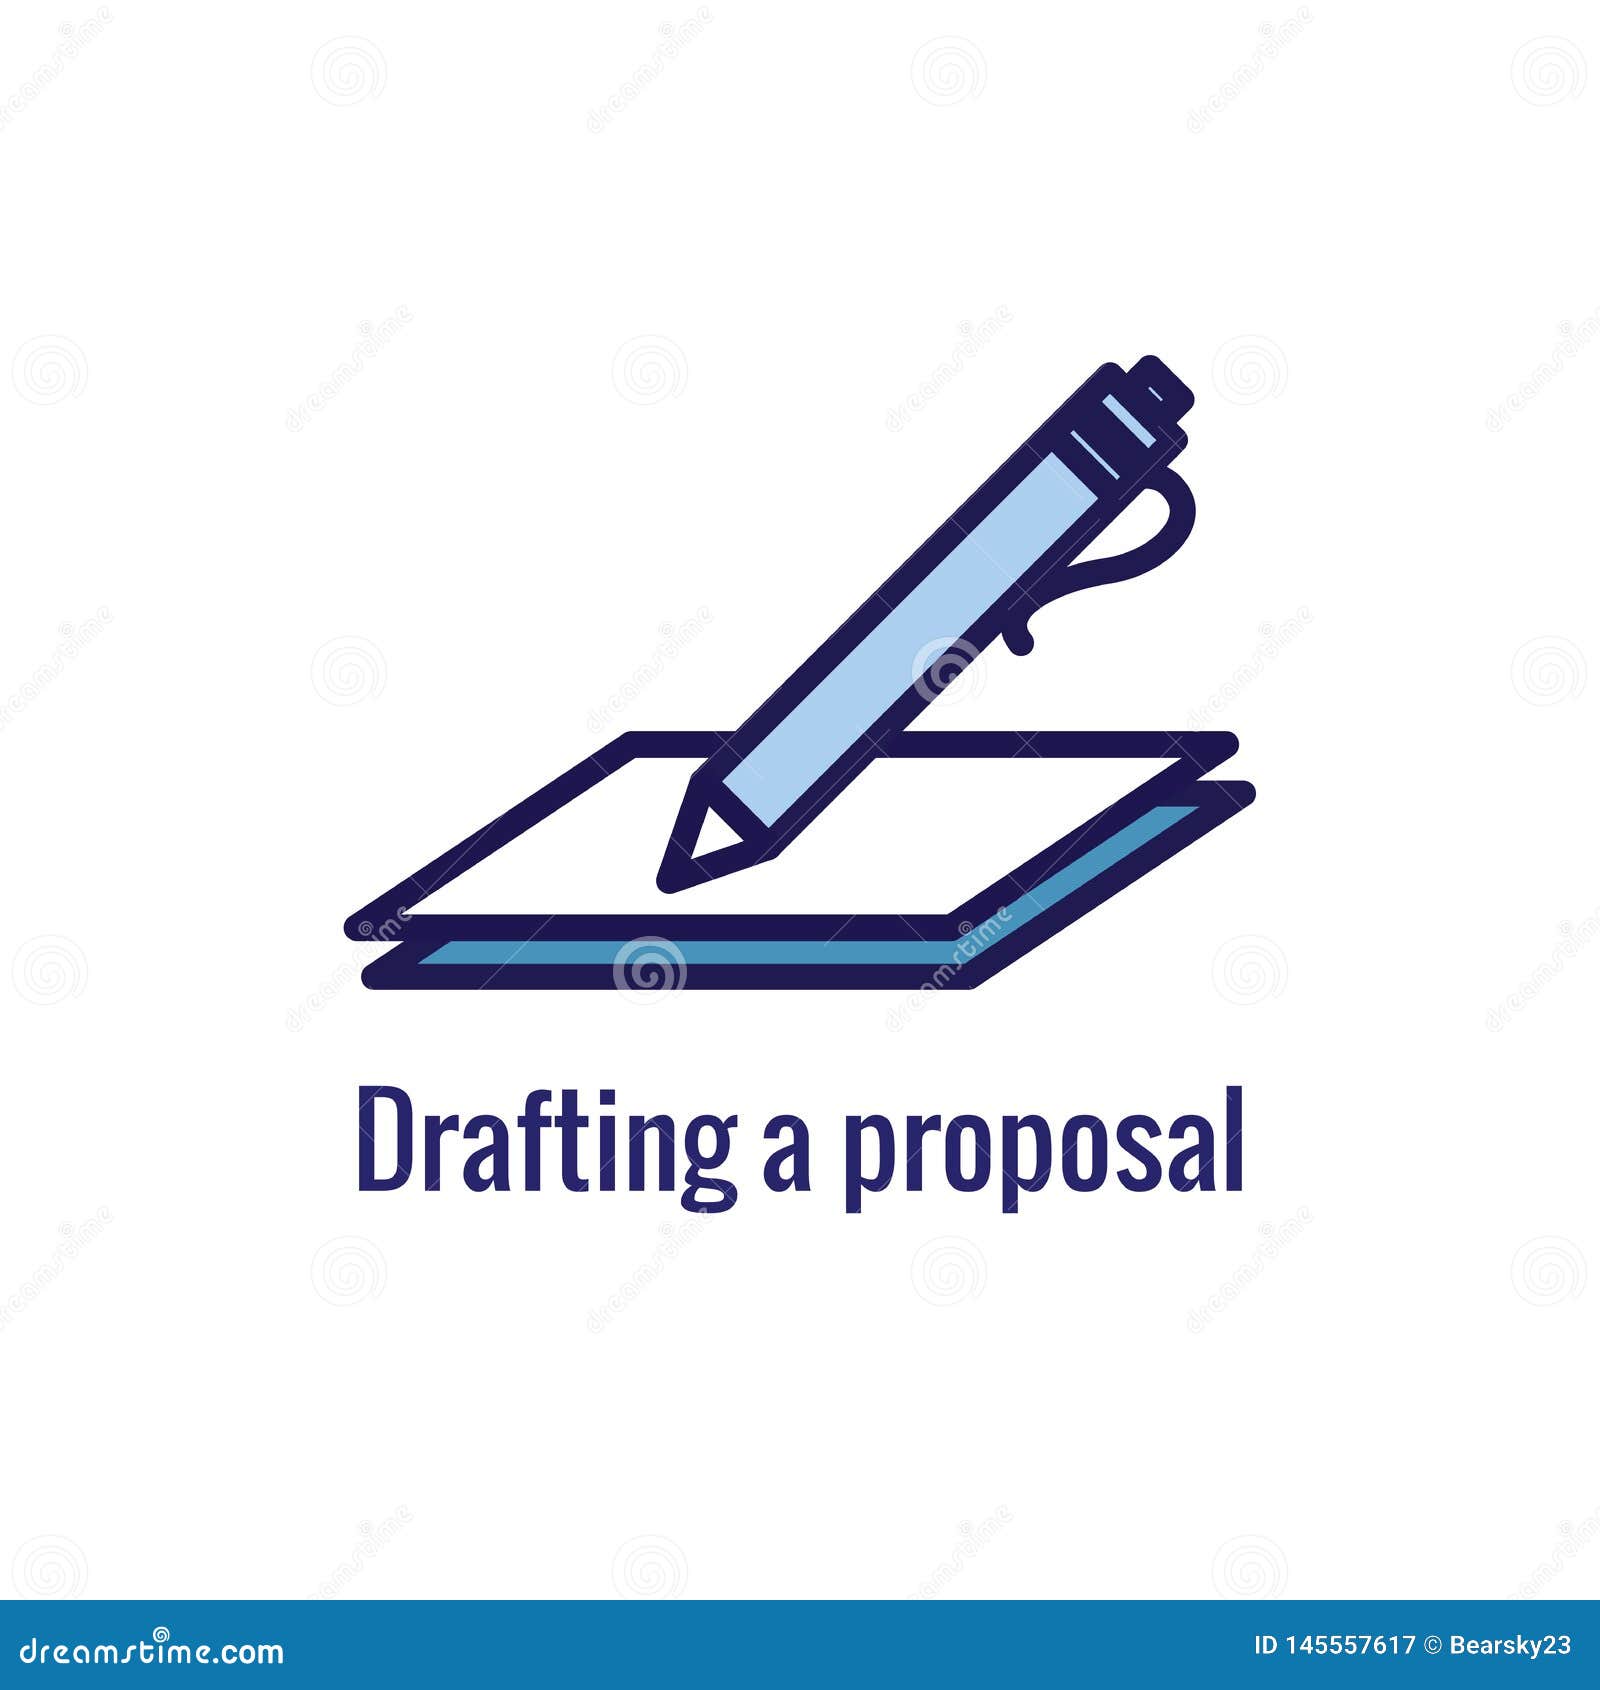 new business process icon, proposal draft phase